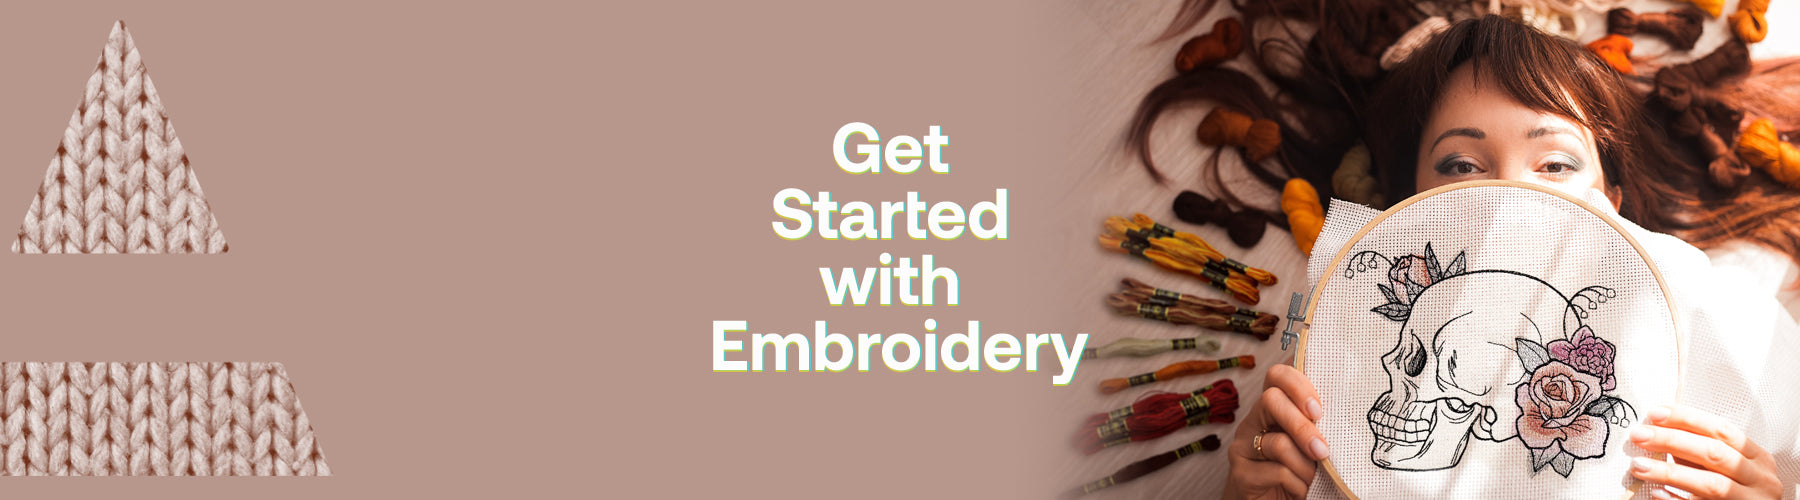 Get Started with Embroidery